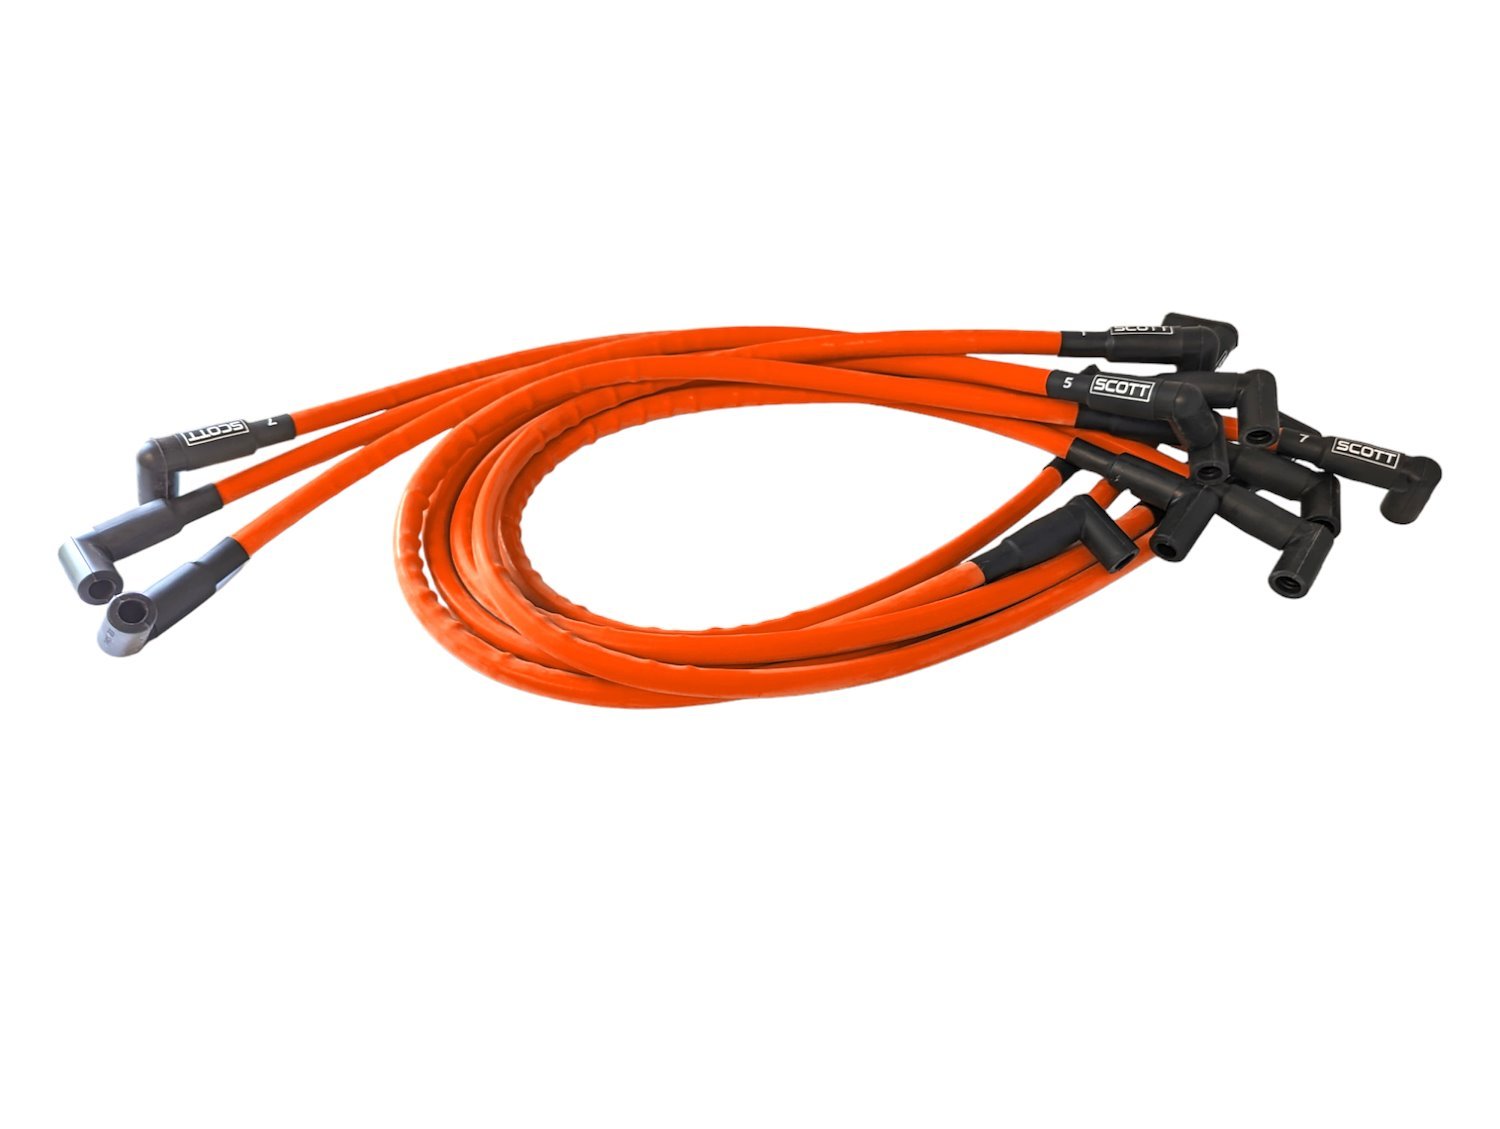 SPW-CH-435-9 High-Performance Silicone-Sleeved Spark Plug Wire Set for Small Block Chevy, Around Front [Fluorescent Orange]